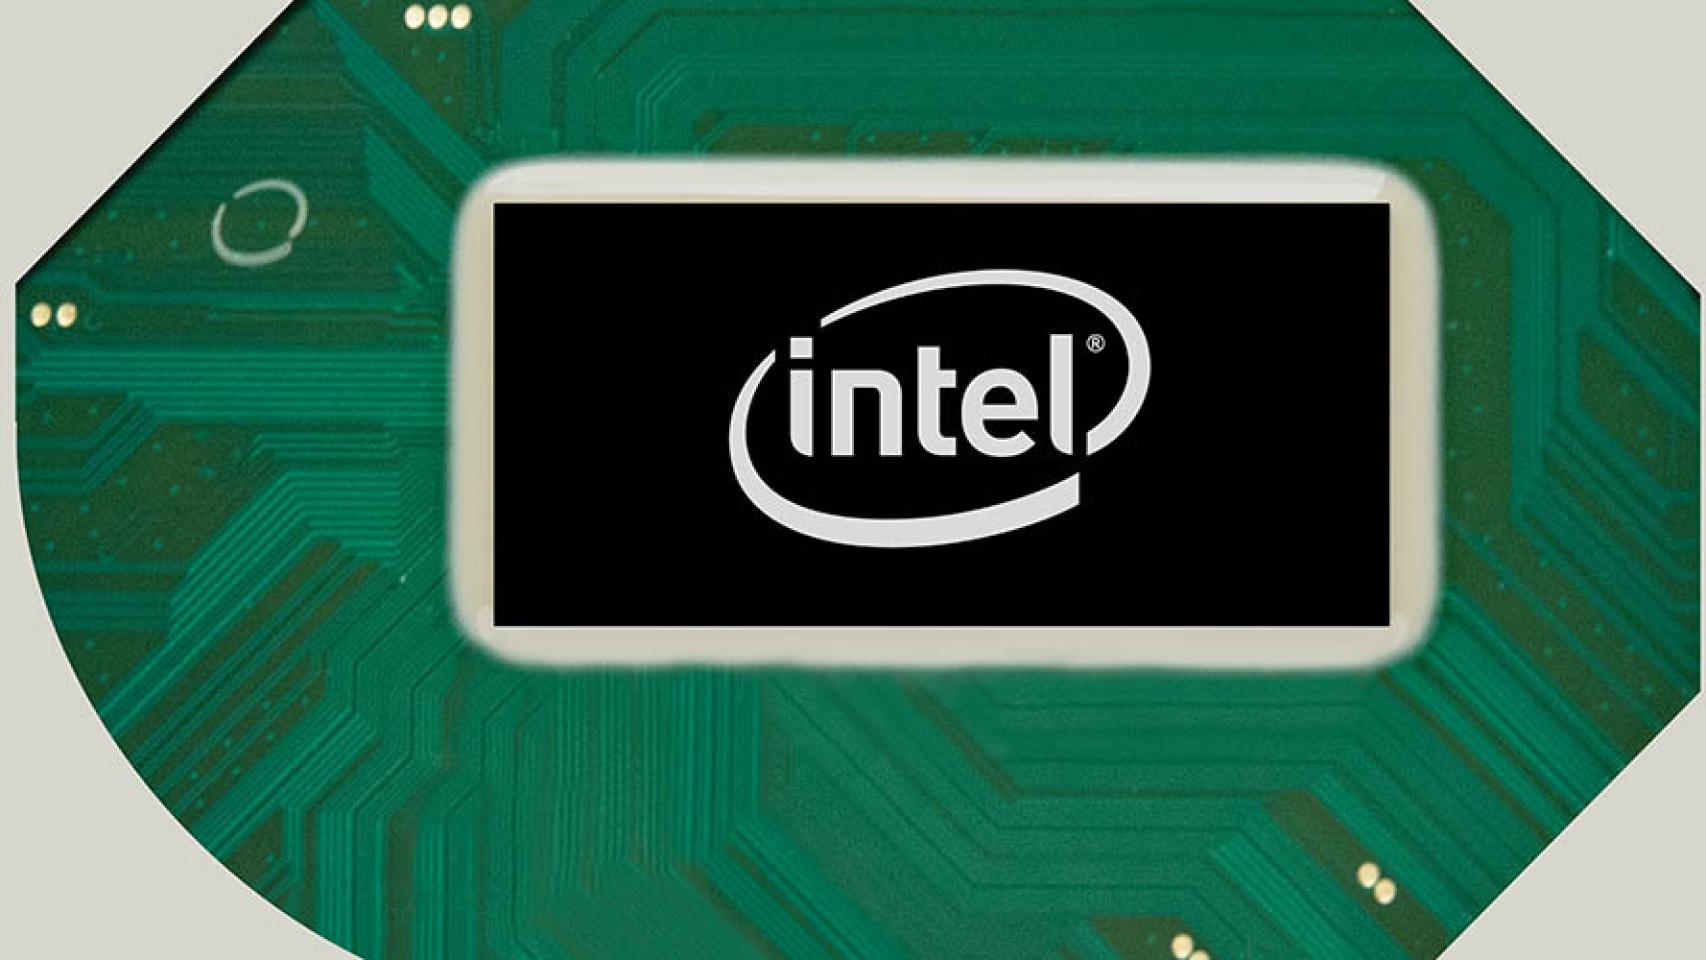 In April 2019, Intel Corporation launched the new 9th Gen Intel